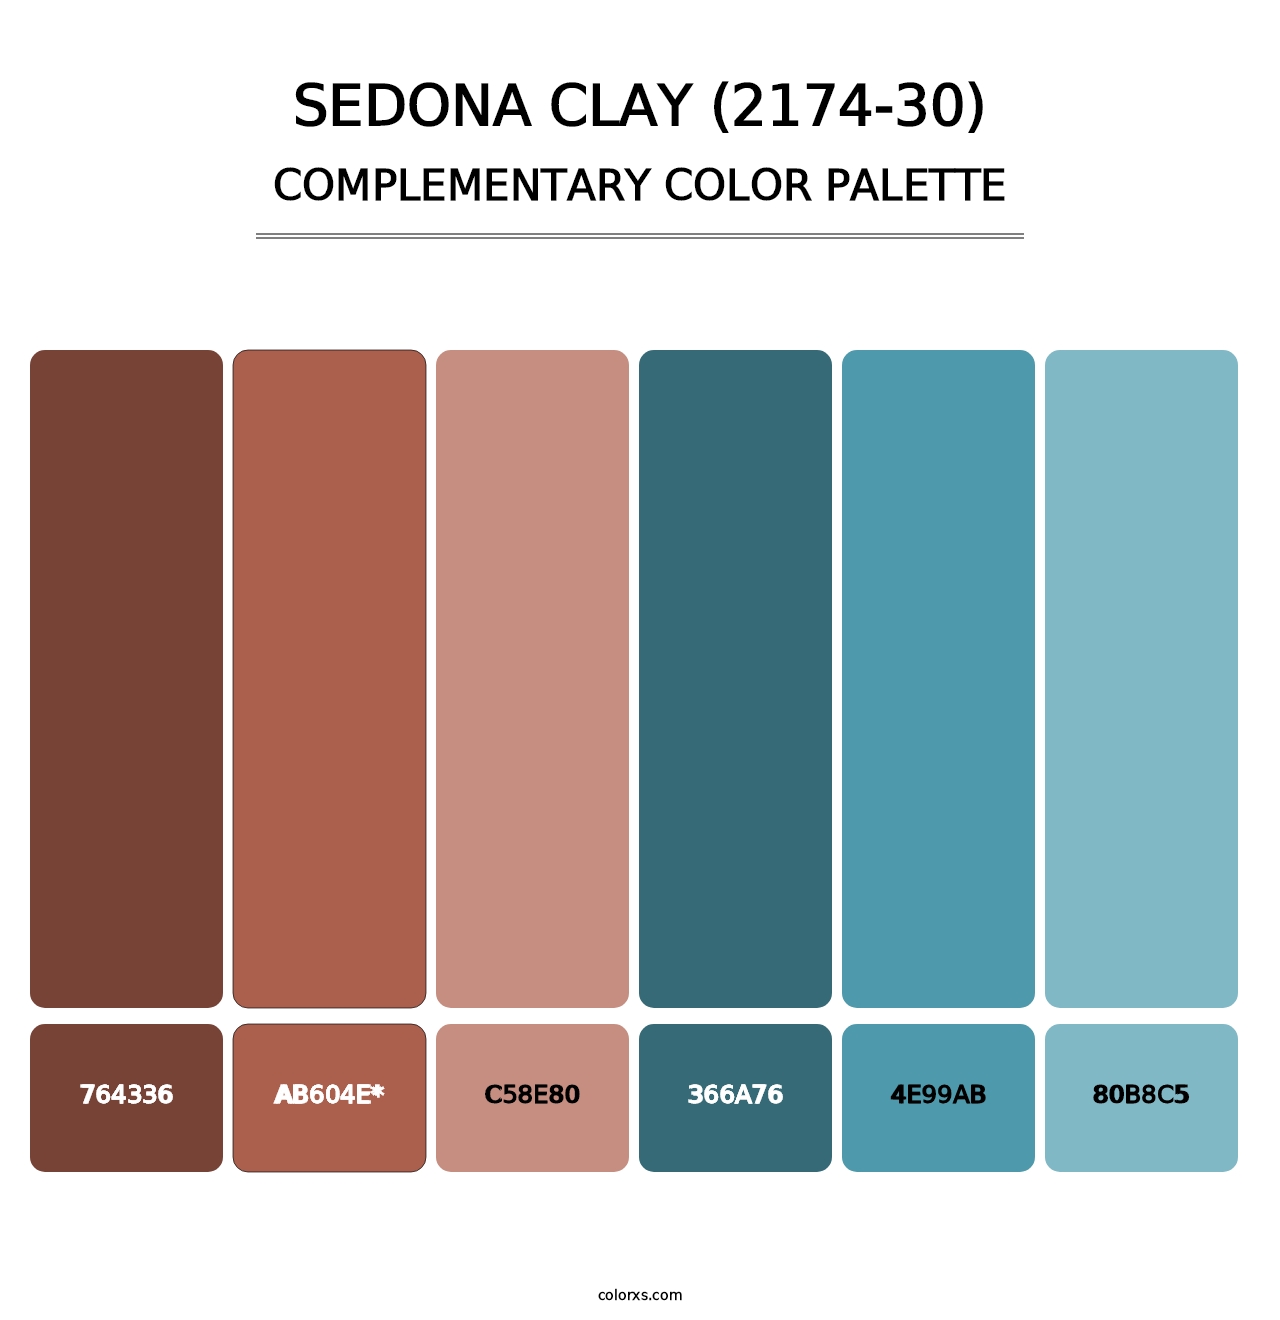 Sedona Clay (2174-30) - Complementary Color Palette